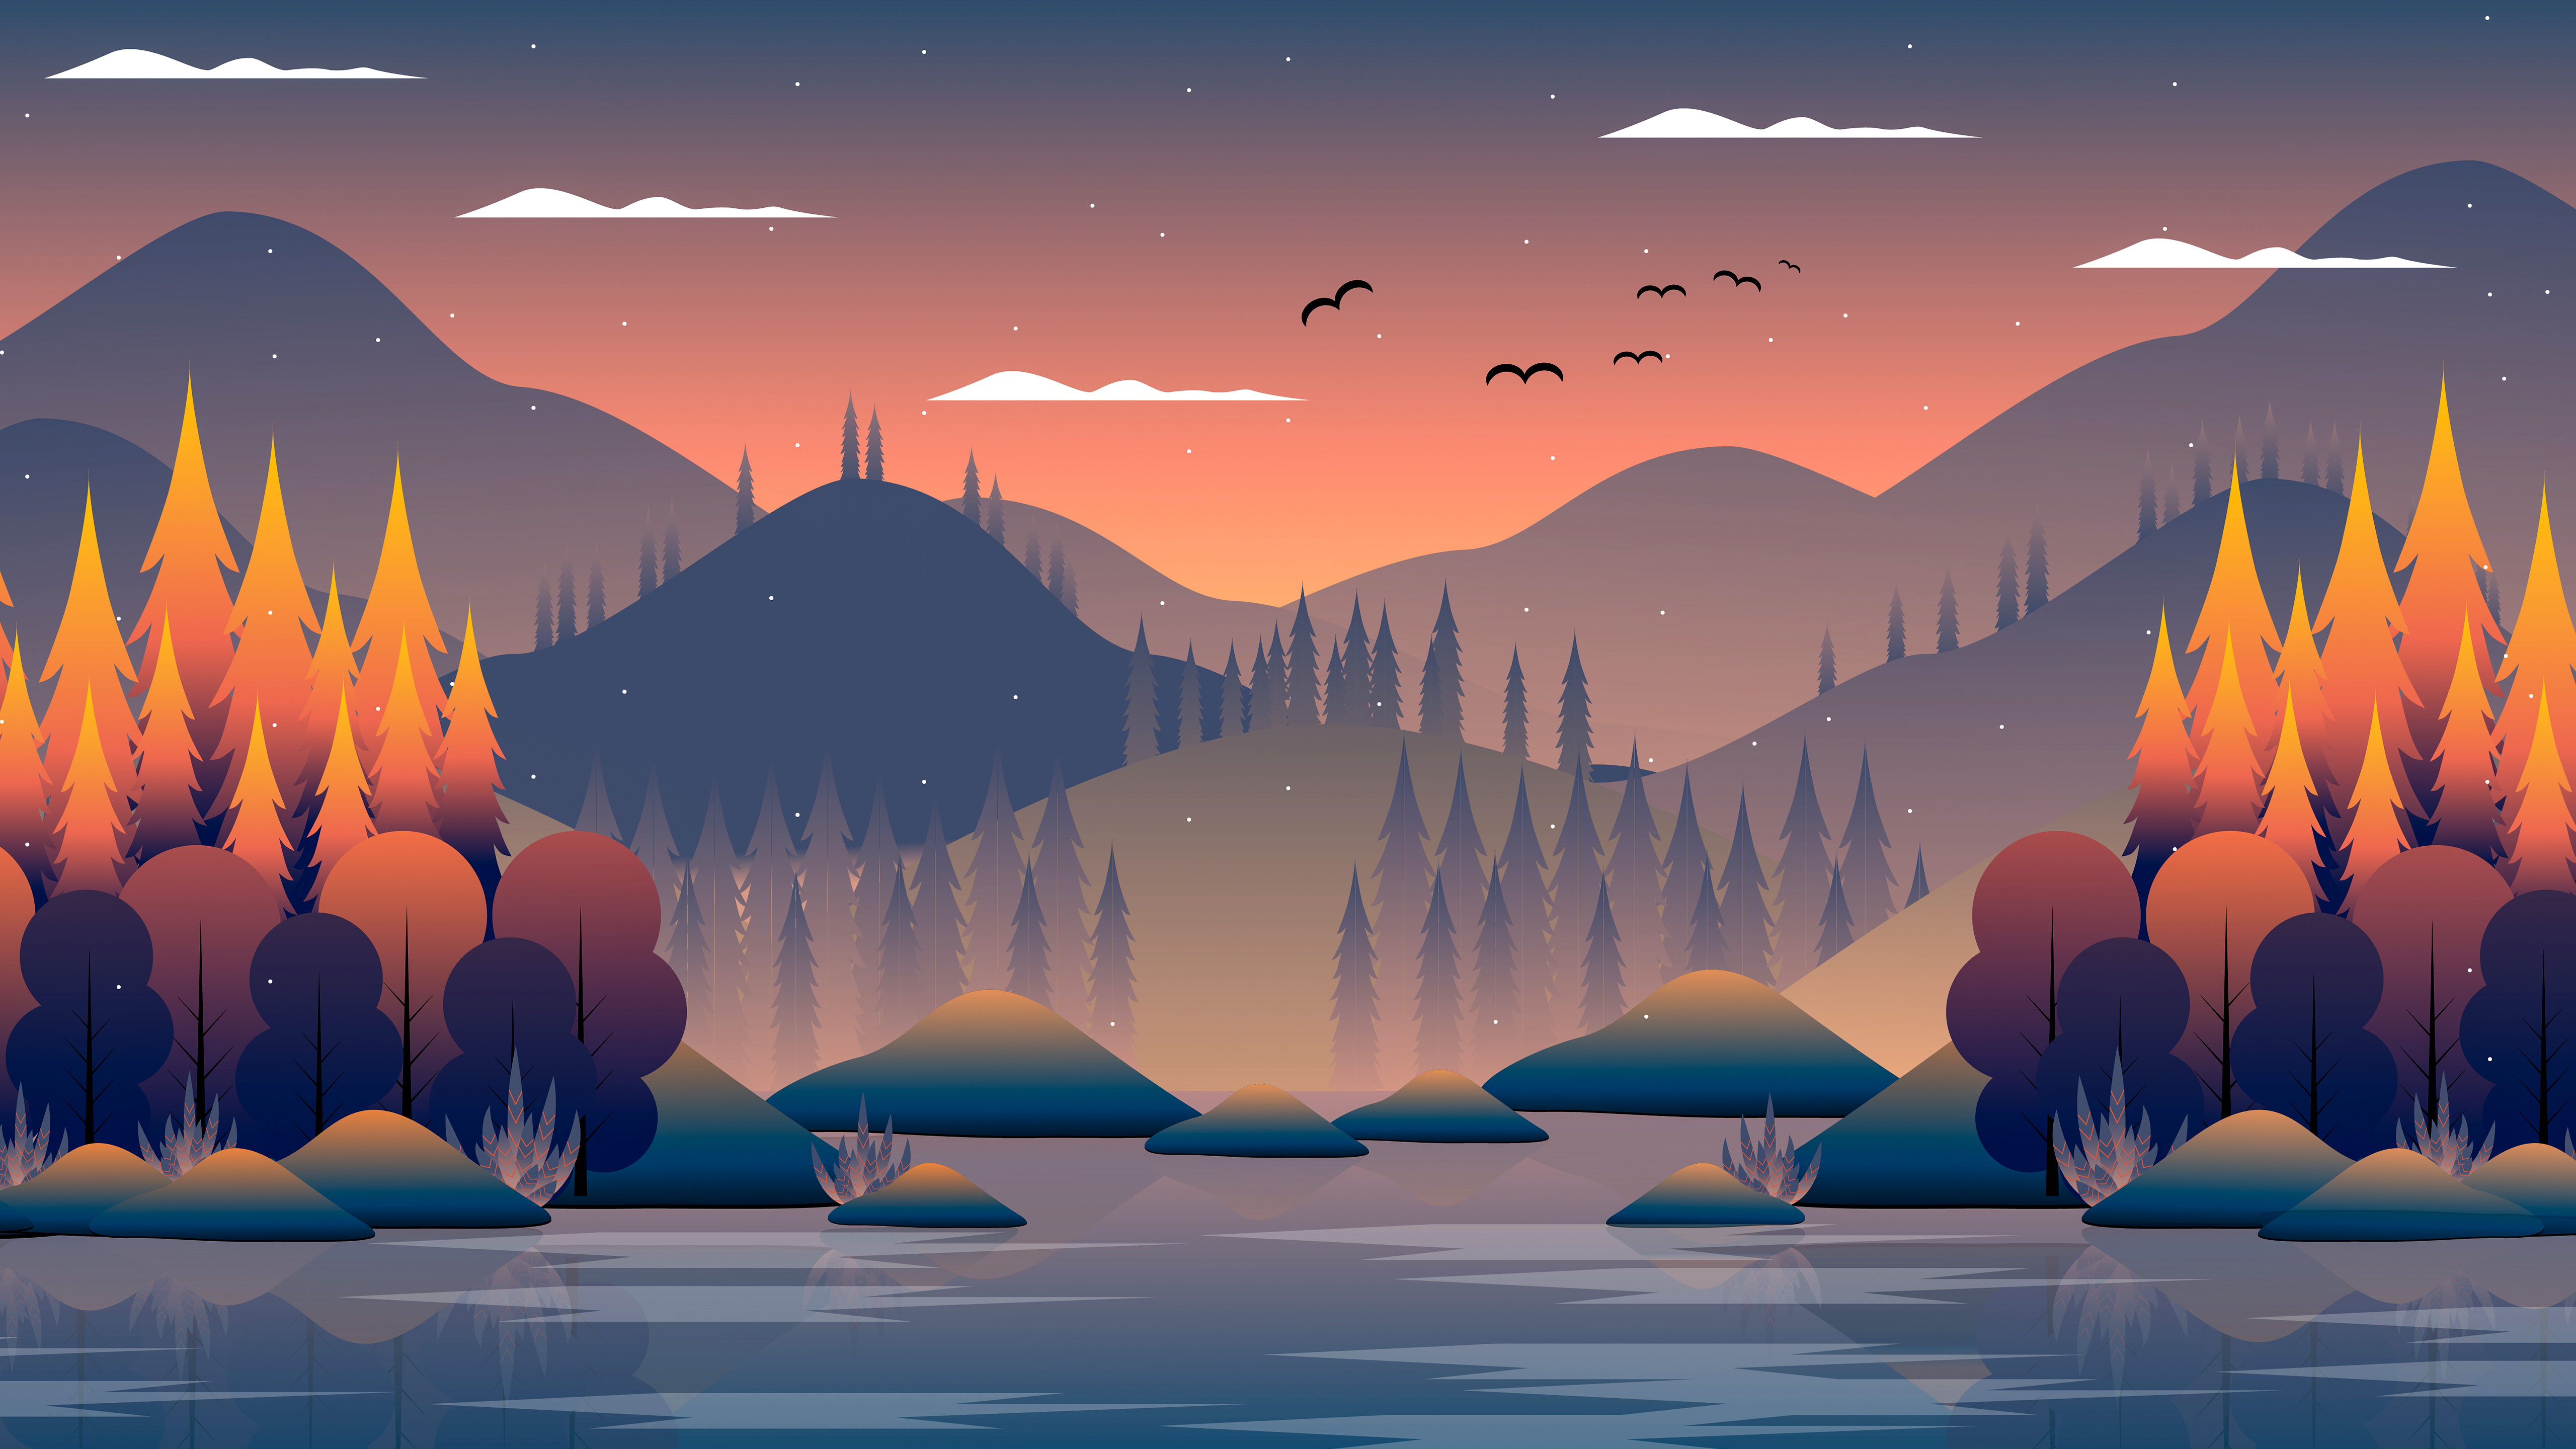 General 5120x2880 digital art trees forest mountains wood clouds birds lake minimalism calm